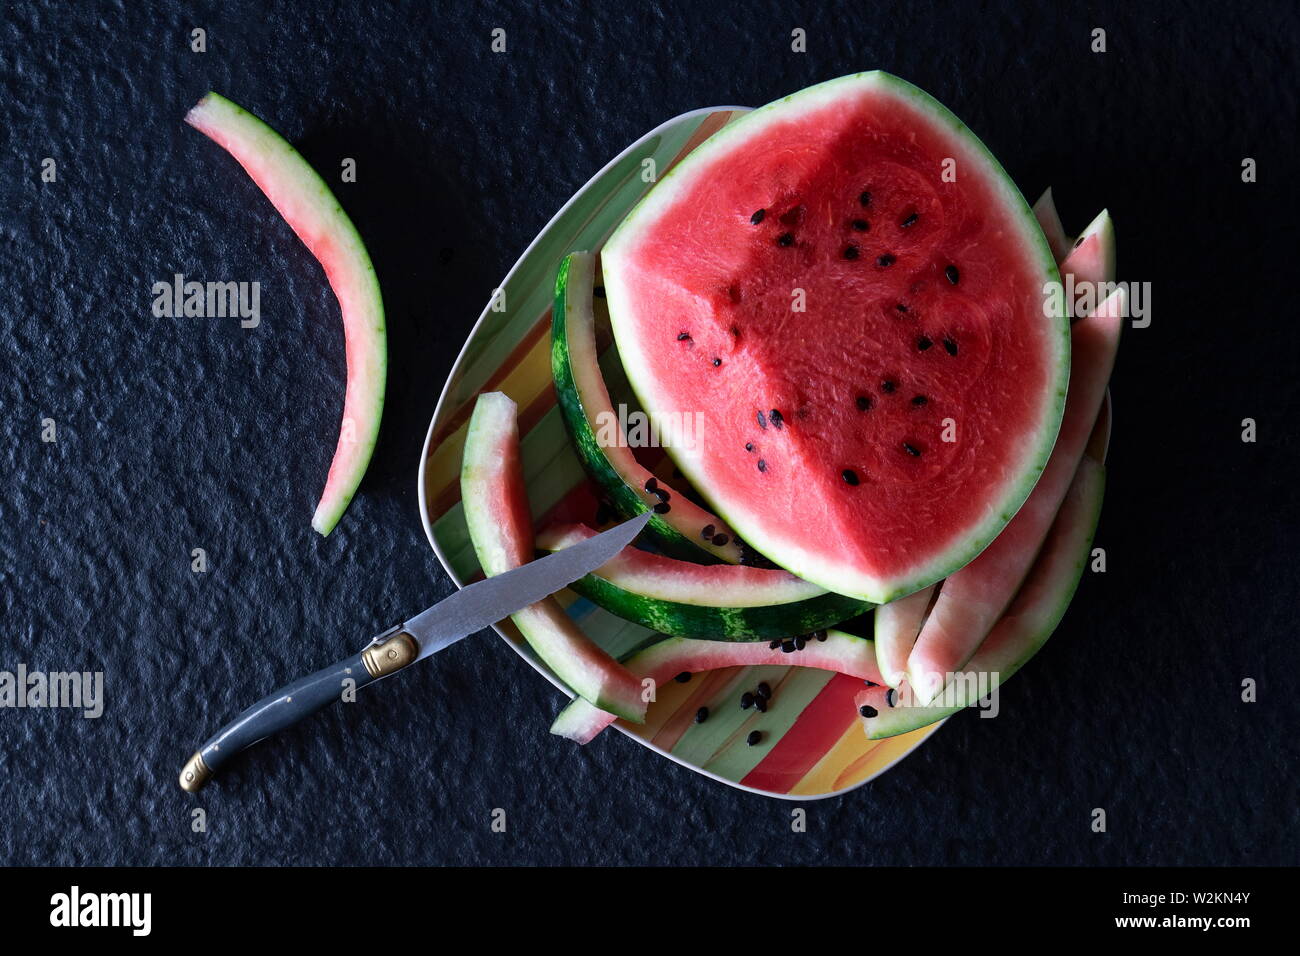 Piece of red watermelon with cut slices and eaten on a plate with a knife on a black background Stock Photo